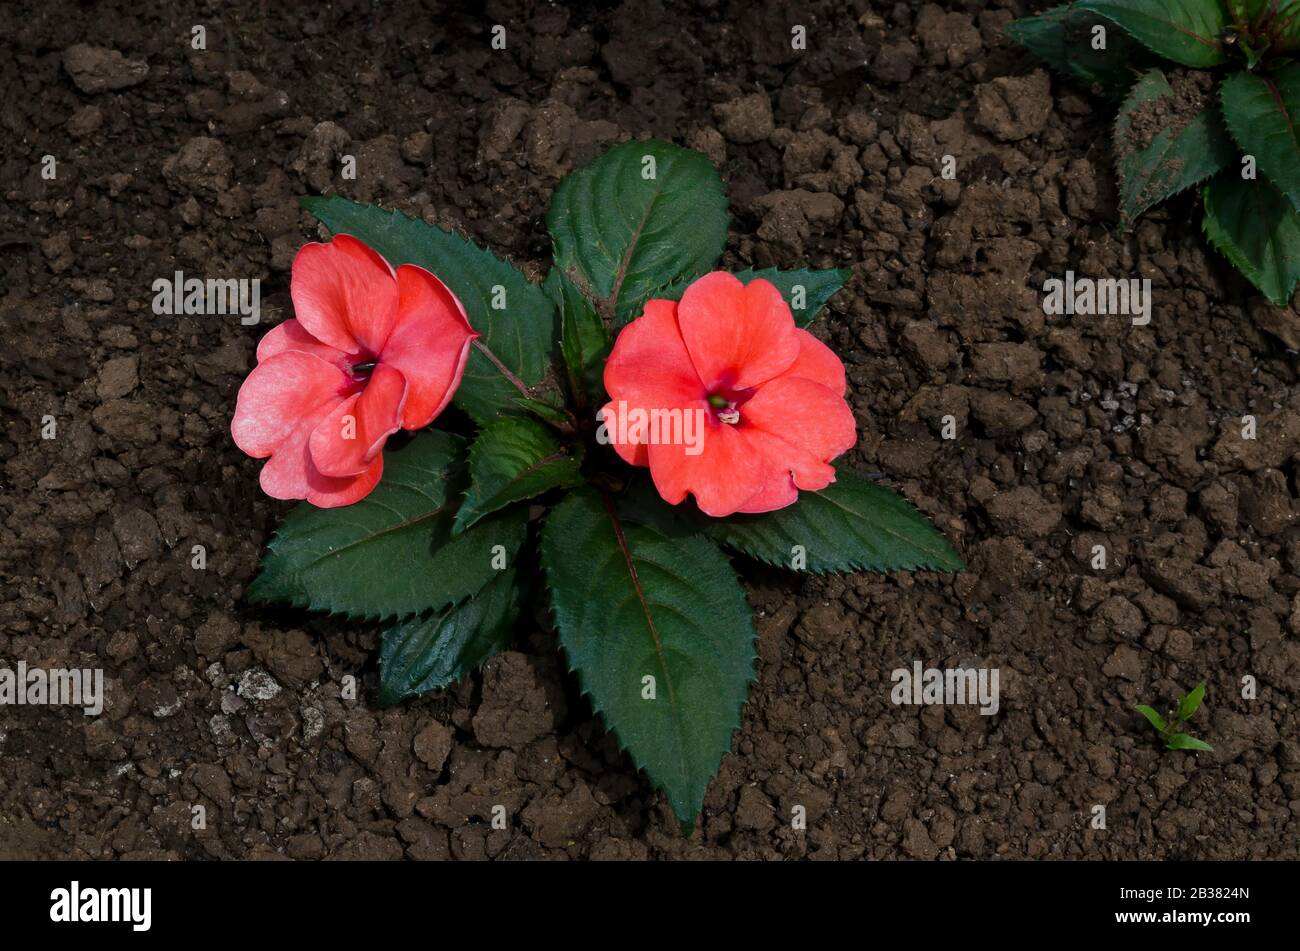 Red flower of Impatiens flower with green toothed leaves growing in garden, Sofia, Bulgaria Stock Photo